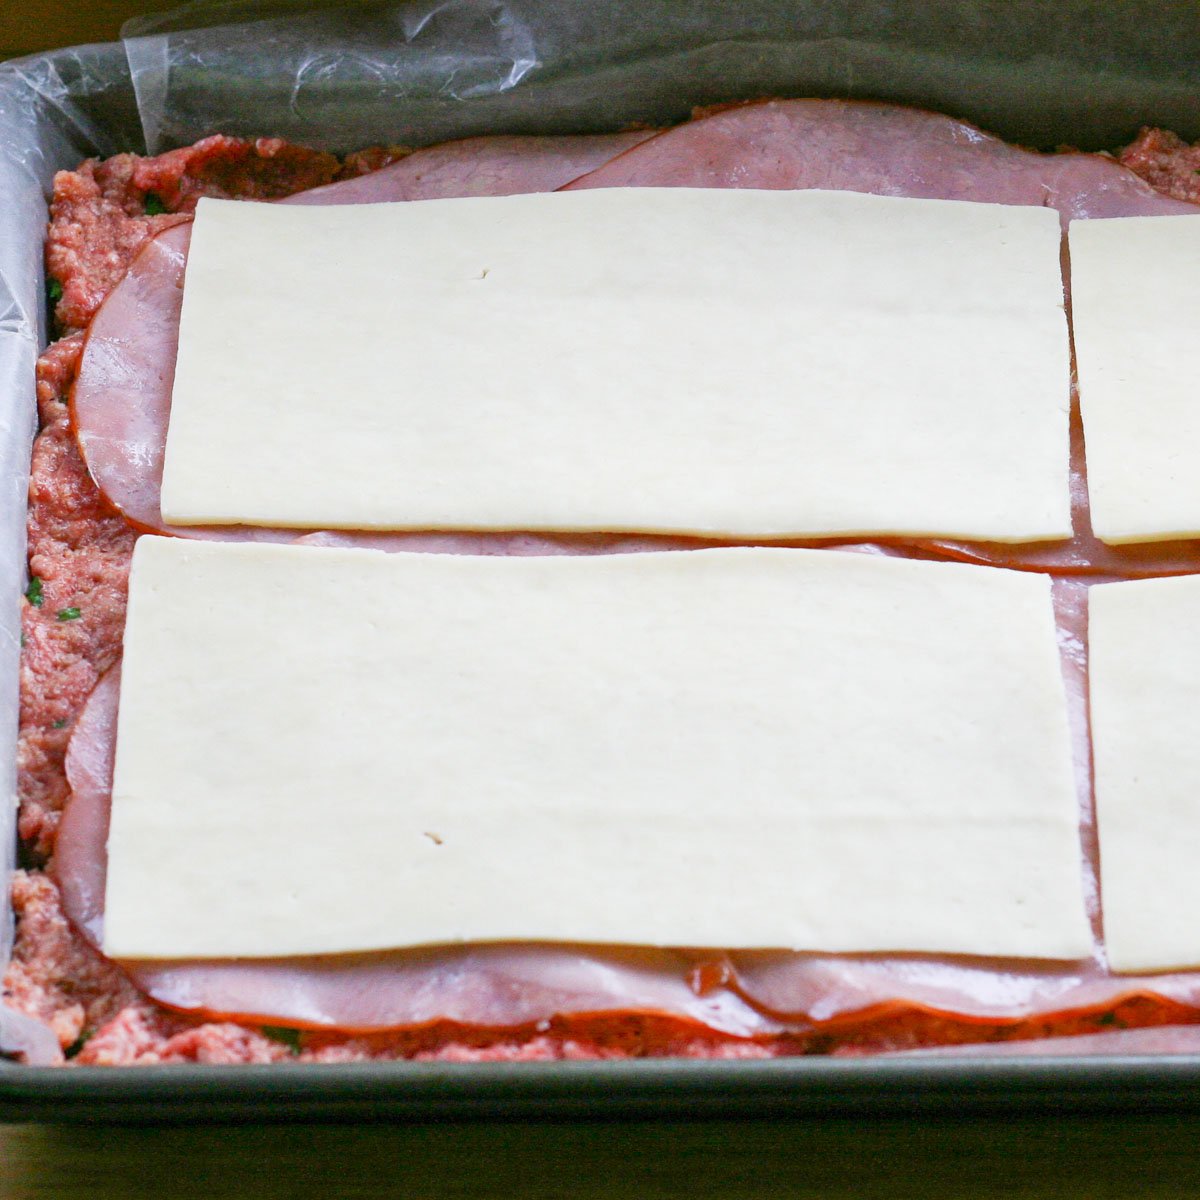 Ground beef mixture in baking sheet topped with ham and mozzarella slices.